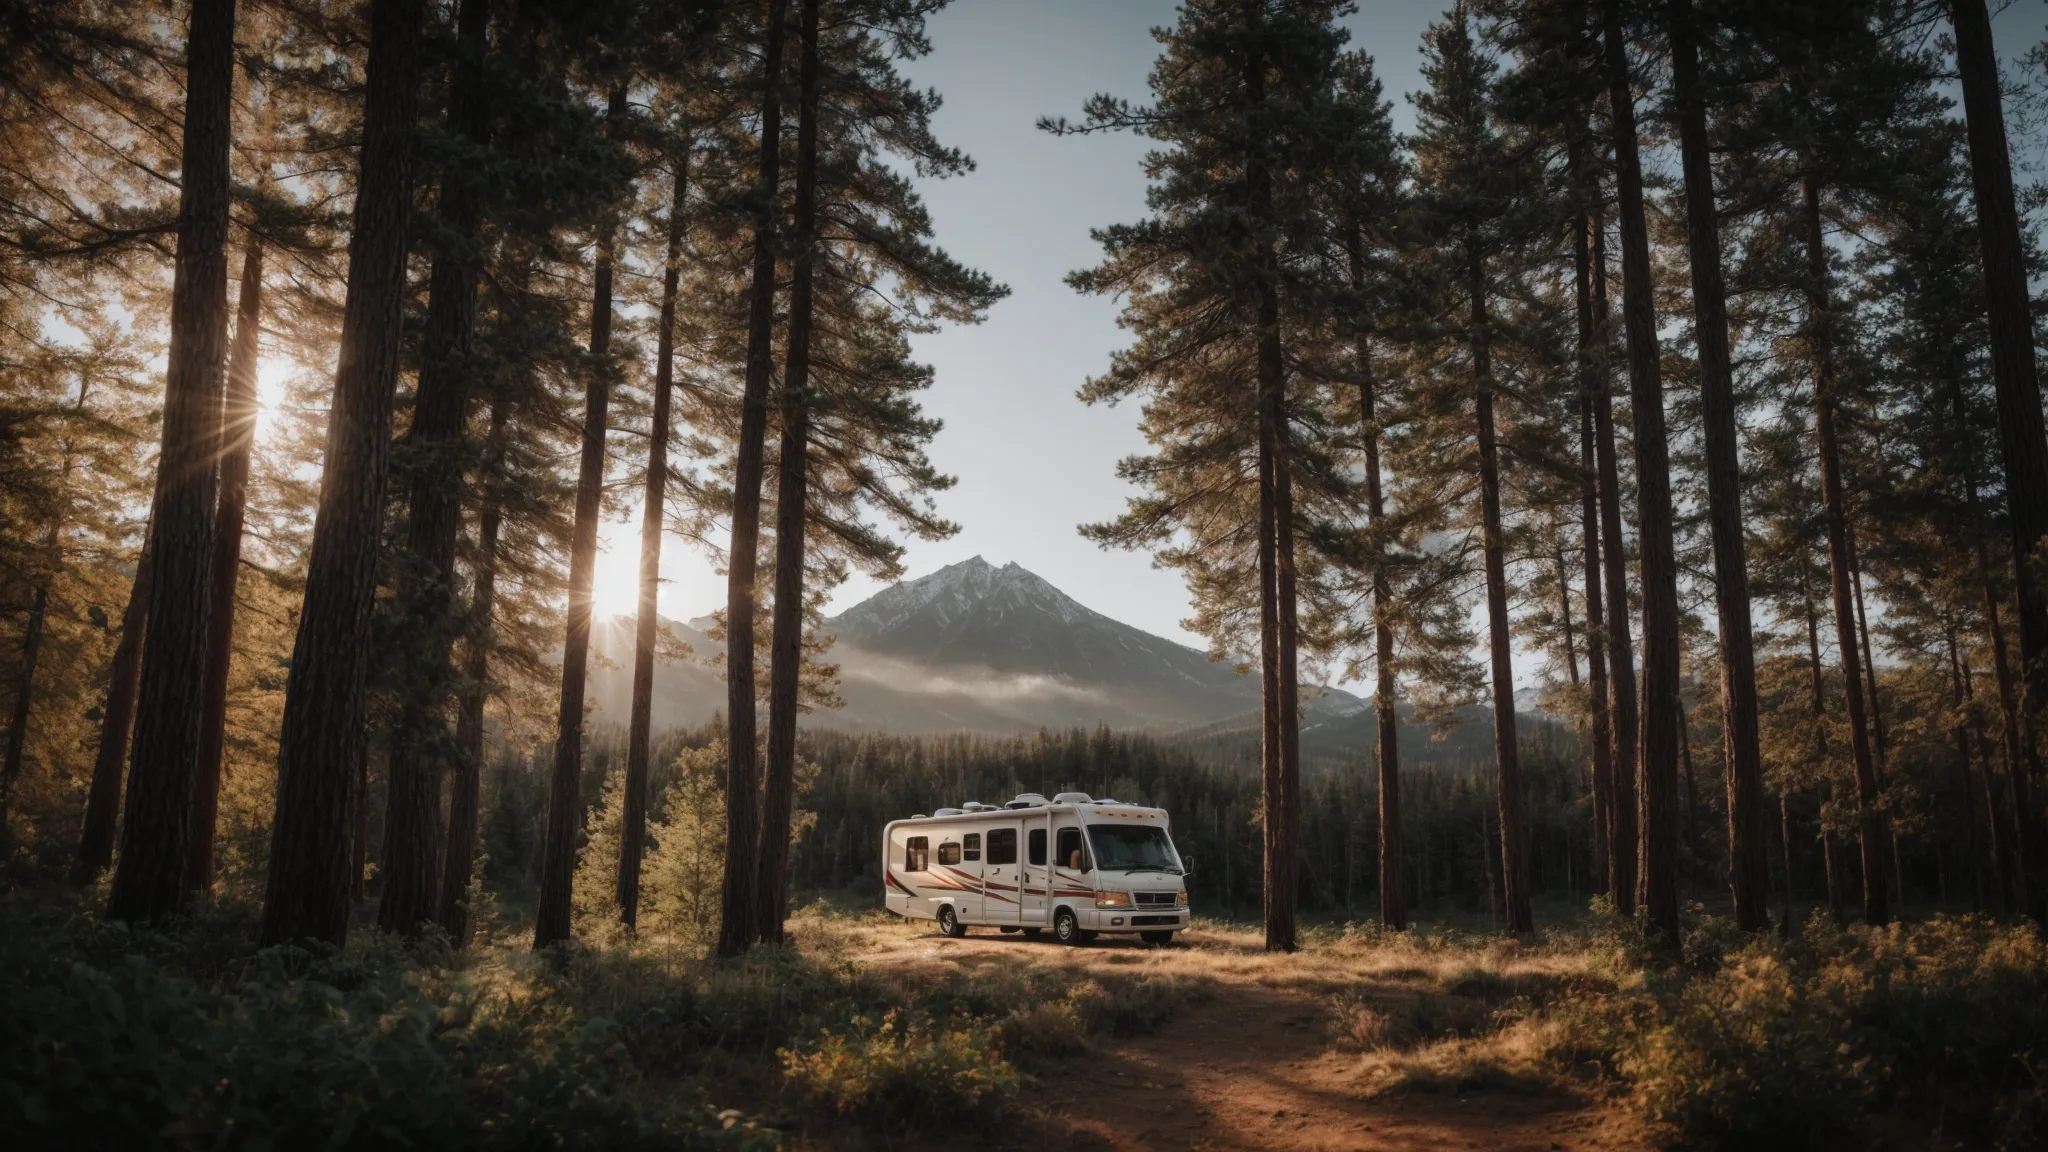 an rv parked amidst sprawling forest with a distant mountain backdrop under a wide, open sky.